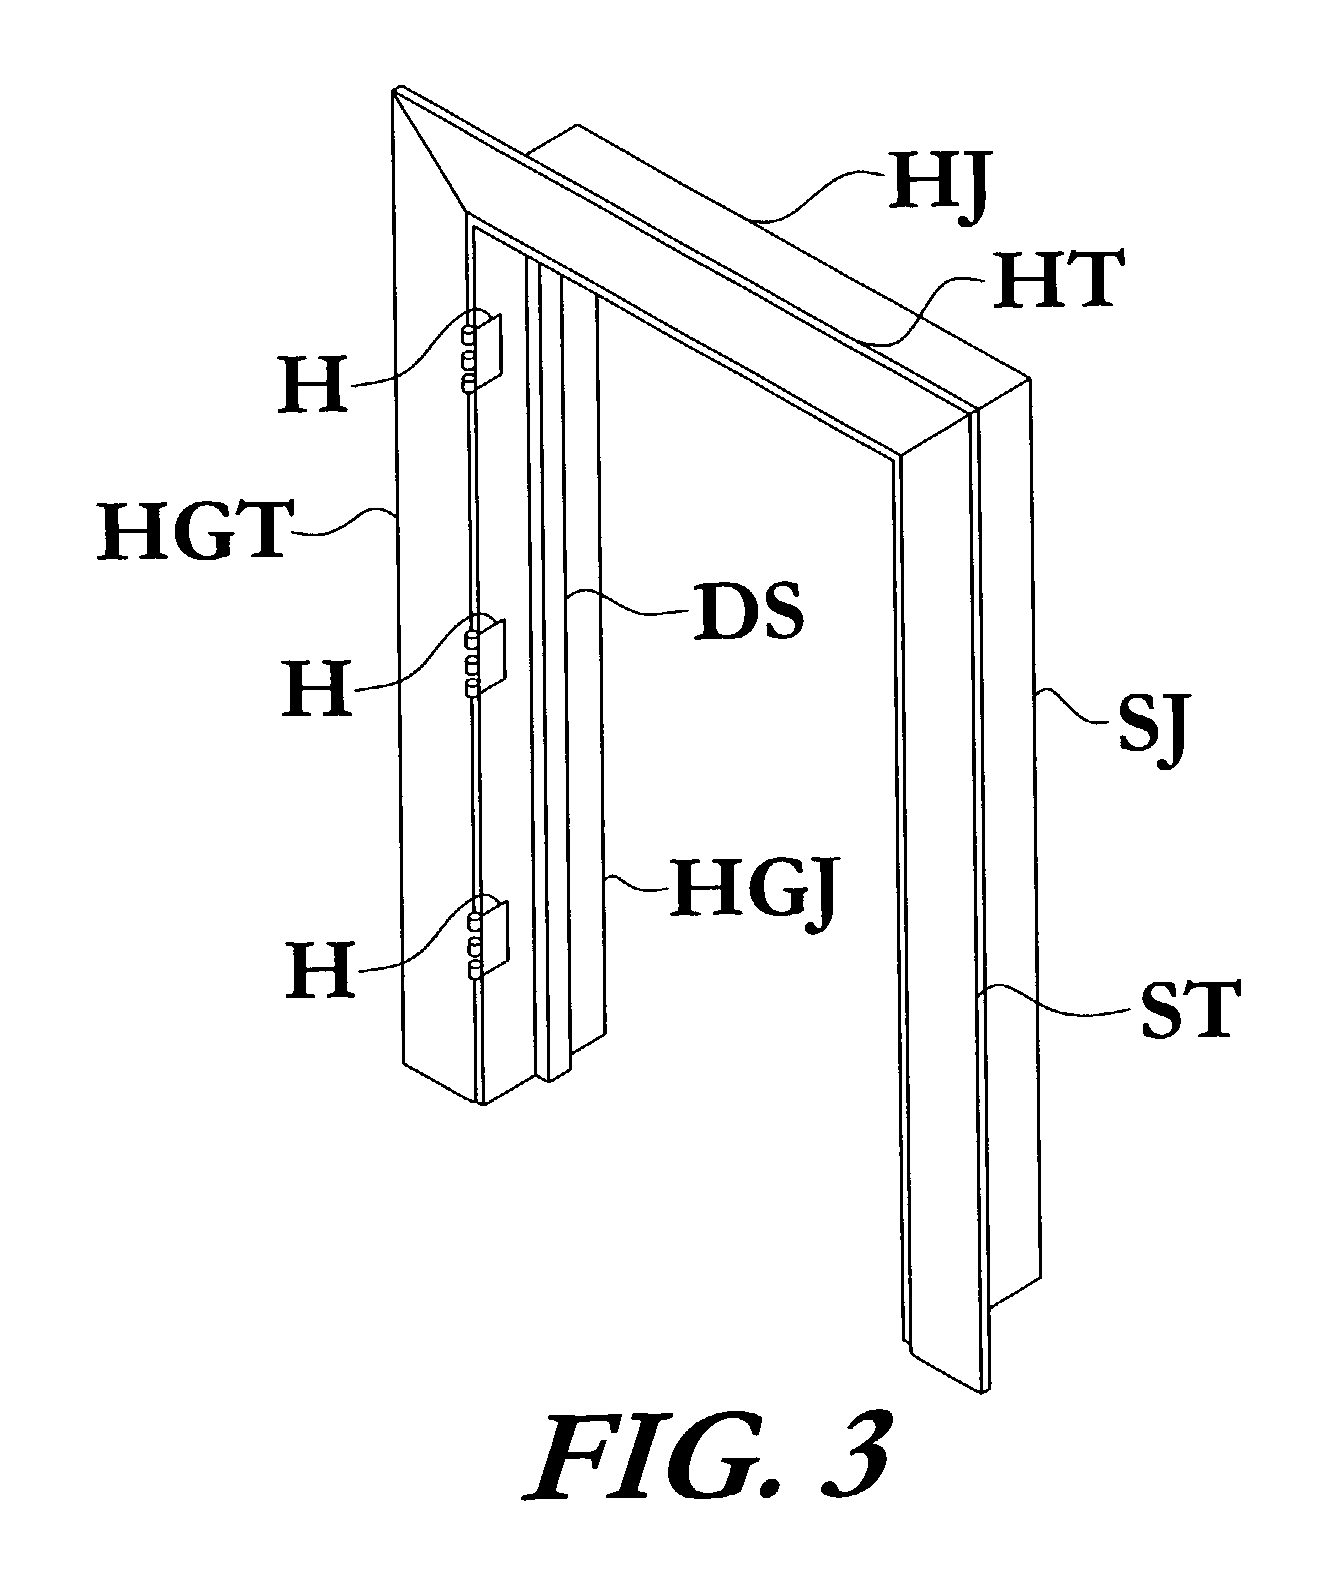 Apparatus for installing a frame and related appurtenances